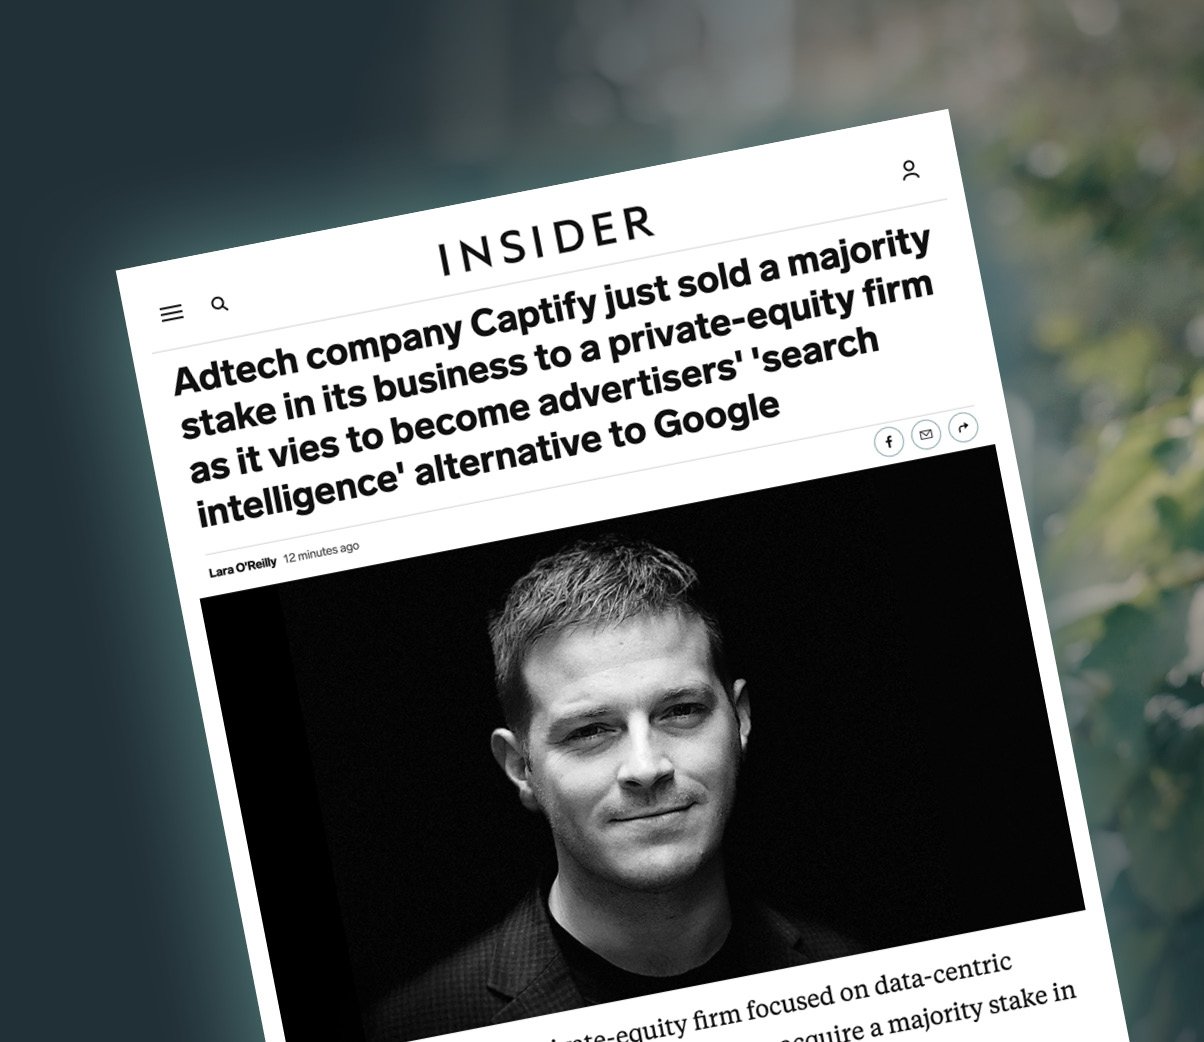 Business Insider: Adtech Company Captify Just Sold A Majority Stake In Its Business To A Private-equity Firm As It Vies To Become Advertisers’ ‘Search Intelligence’ Alternative To Google